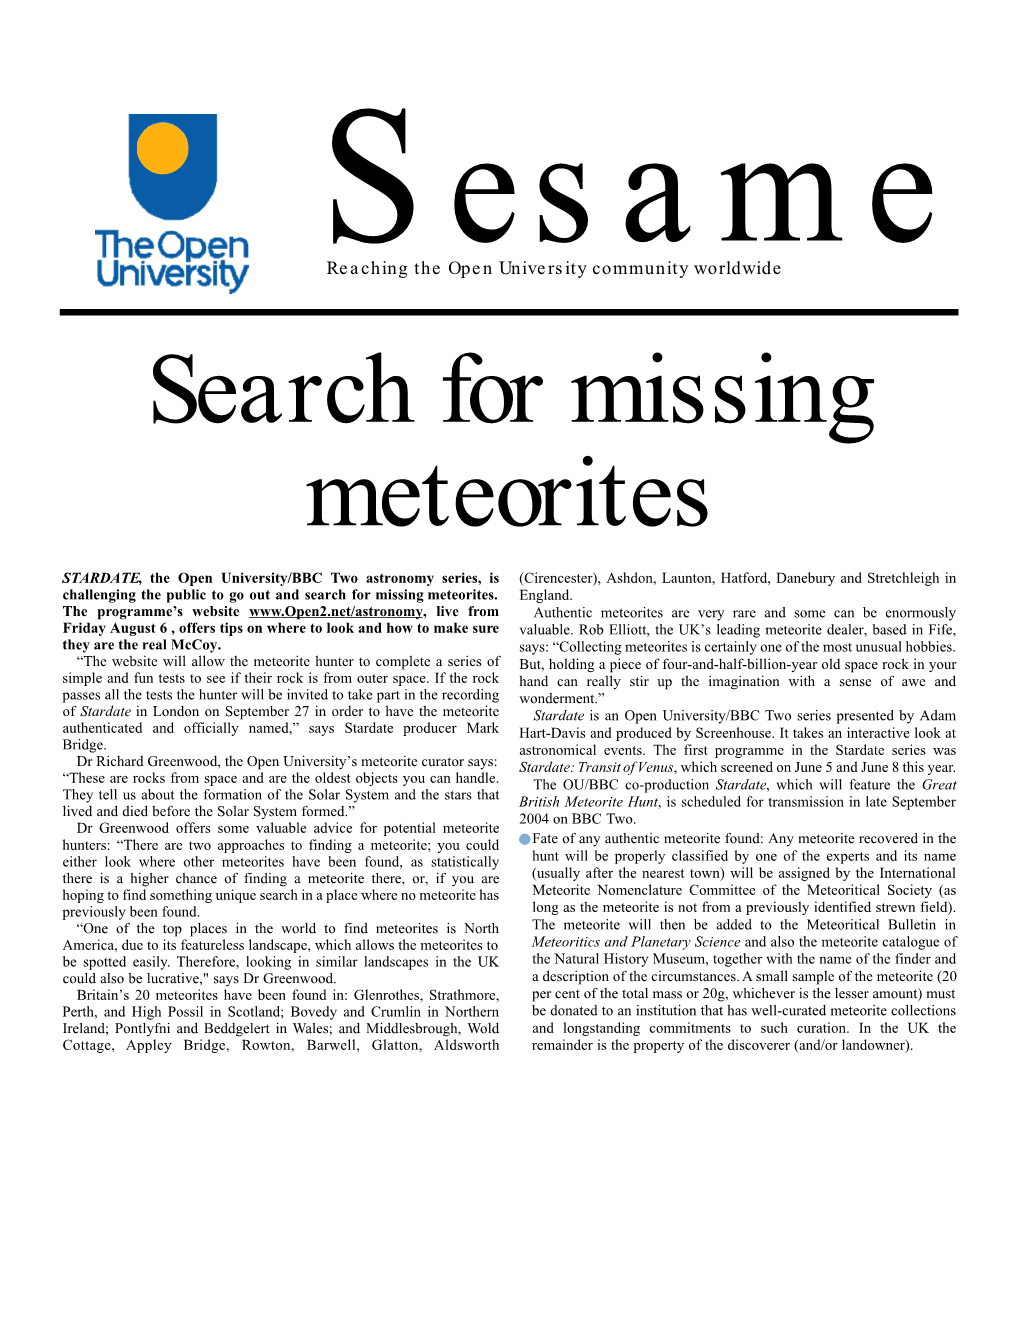 Search for Missing Meteorites